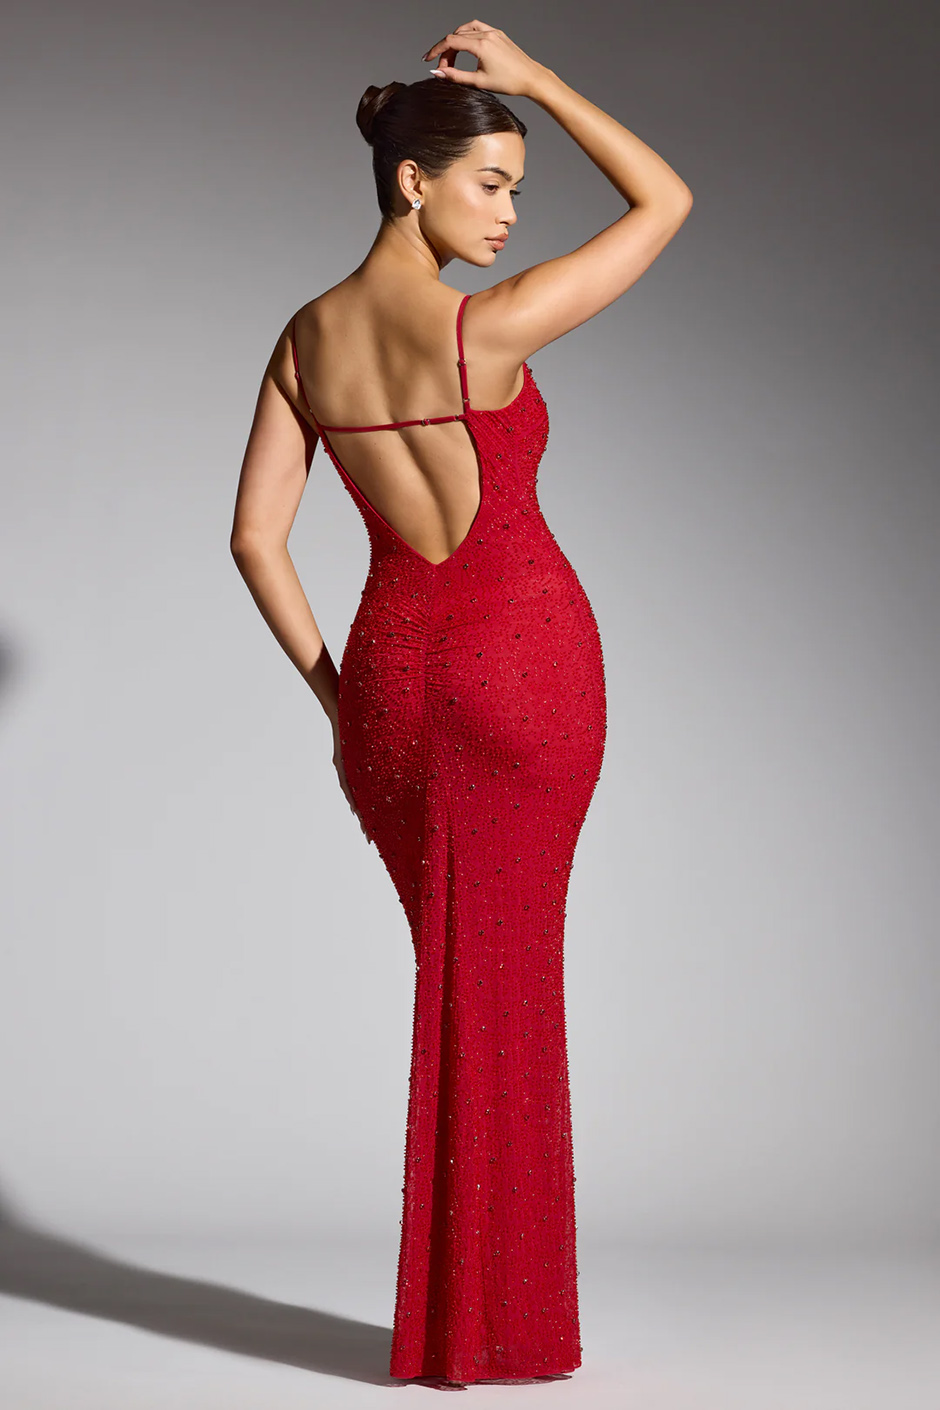 Red wedding guest dress from Oh Polly with embellished design, plunge neckline and low back